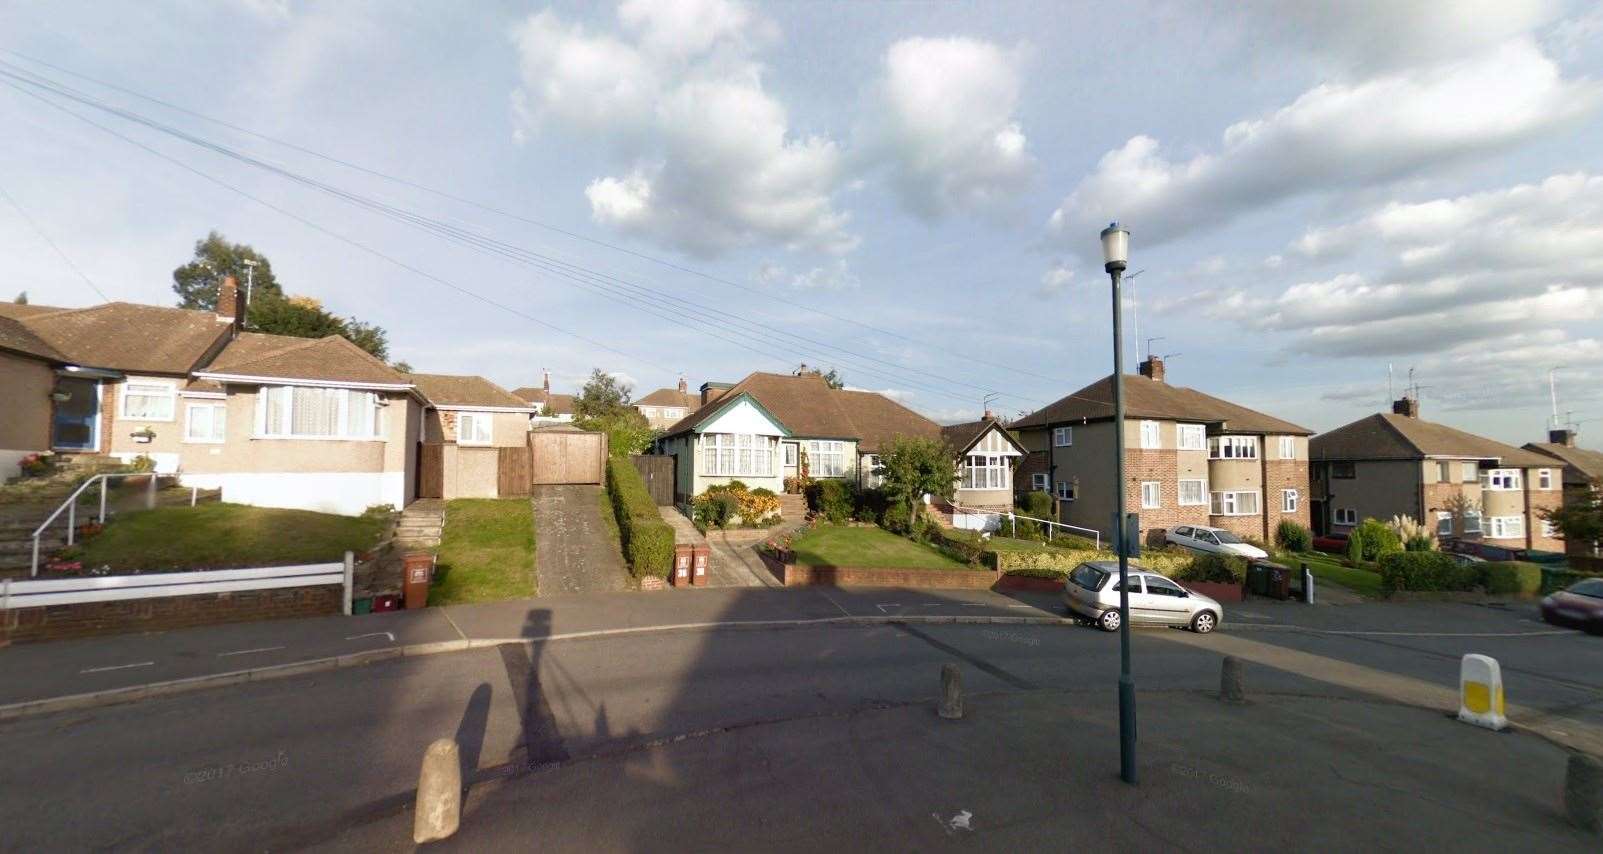 Nicola's parents bought their first house in Downbank Avenue, Barnehurst when they were 22 and 23 Photo: Google Images